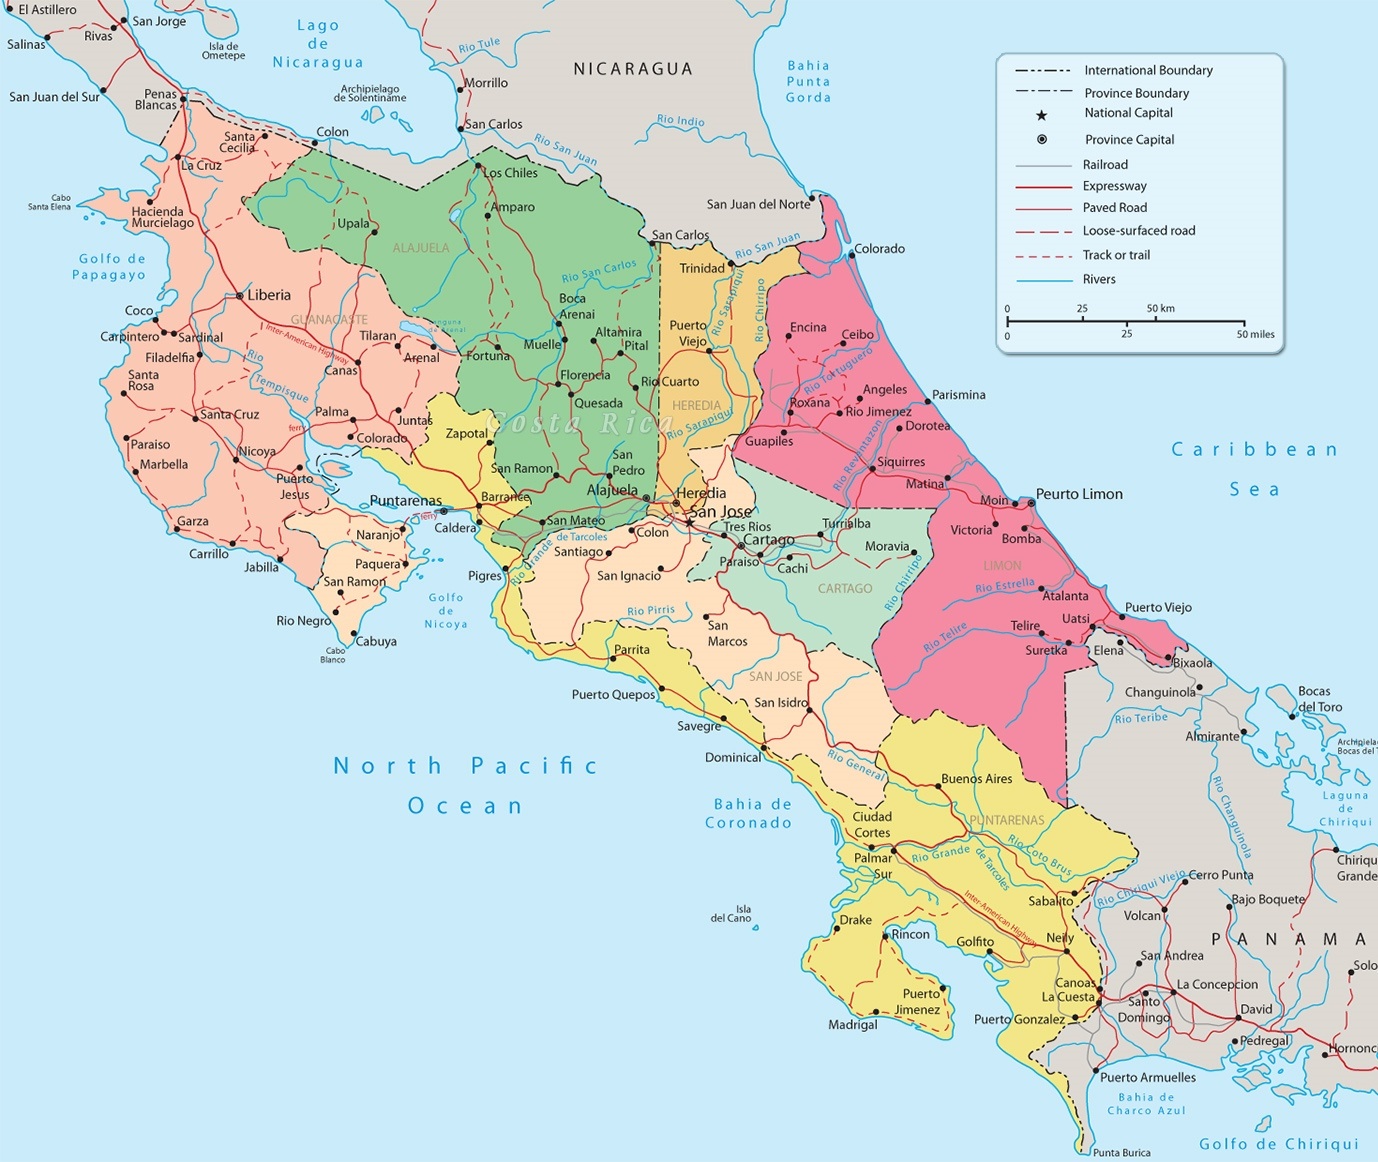 Printable Maps Of All Costa Rica & Details Maps Of Popular Destinations